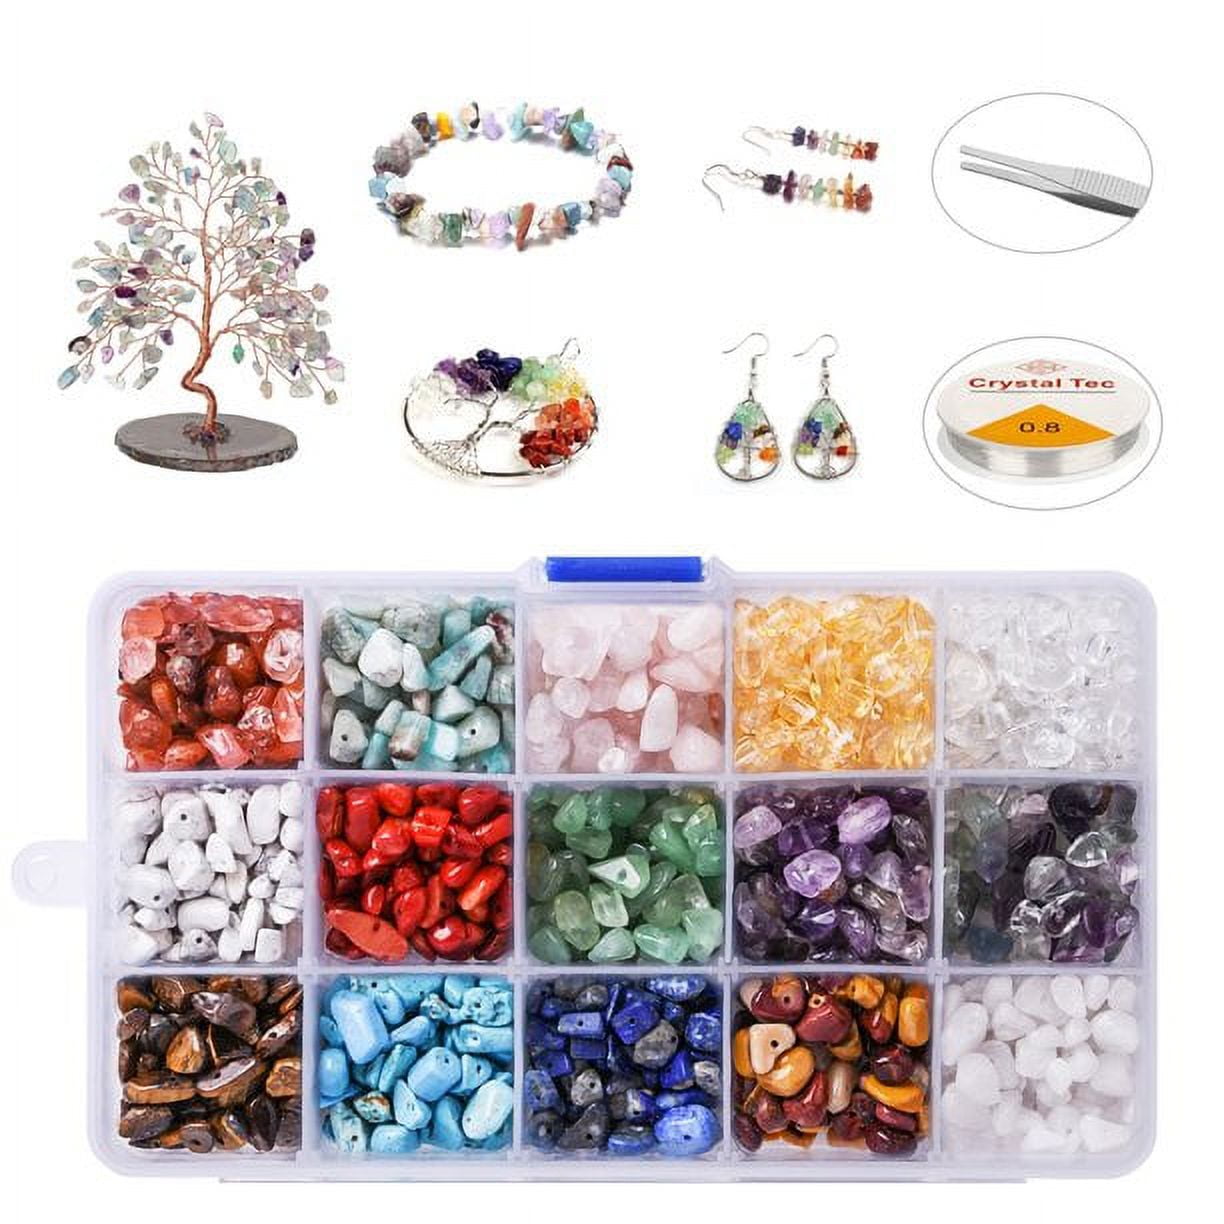 Crystal Beads for Jewelry Making, 2800PCS Natural Crystal Bead Gemstone  Chip Beads for Earring Ring Making Kit with Spacer Beads Earring Hooks  Pendants Charms Wire String for DIY Bracelets Beading Kit